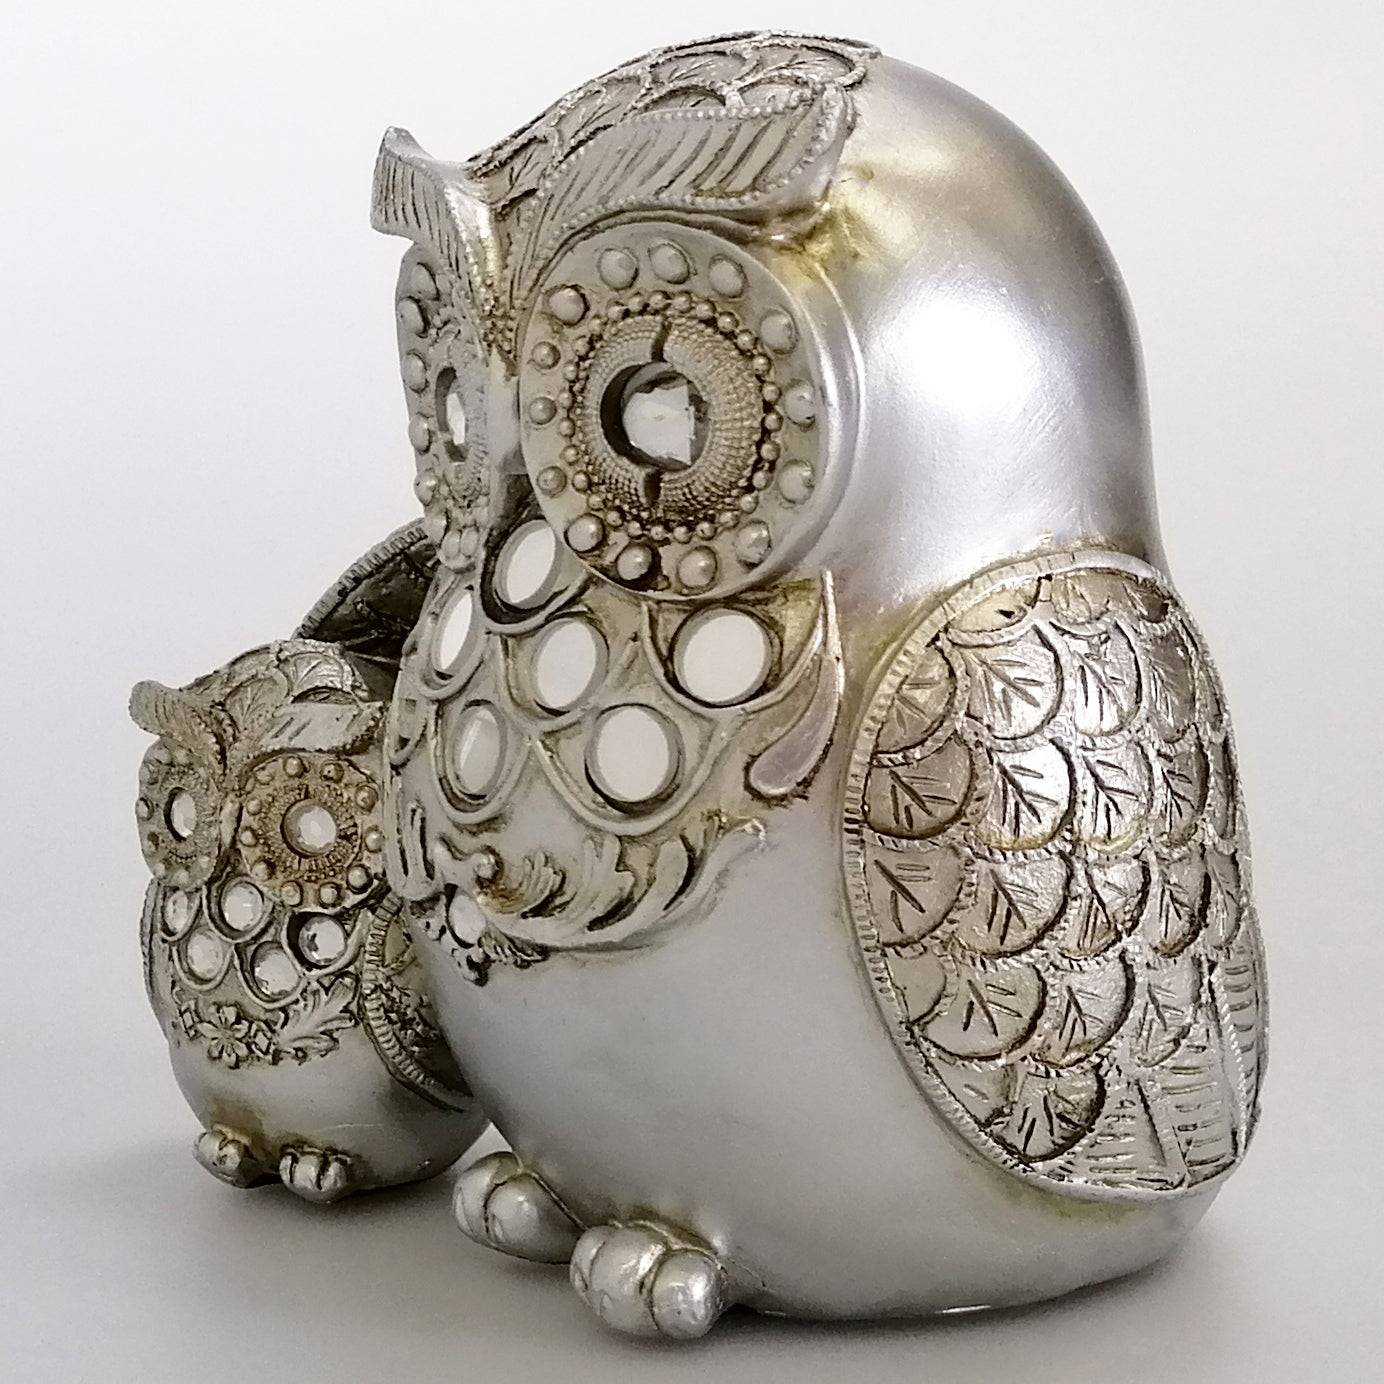 Owl with Chick Figurine - Silver-Look